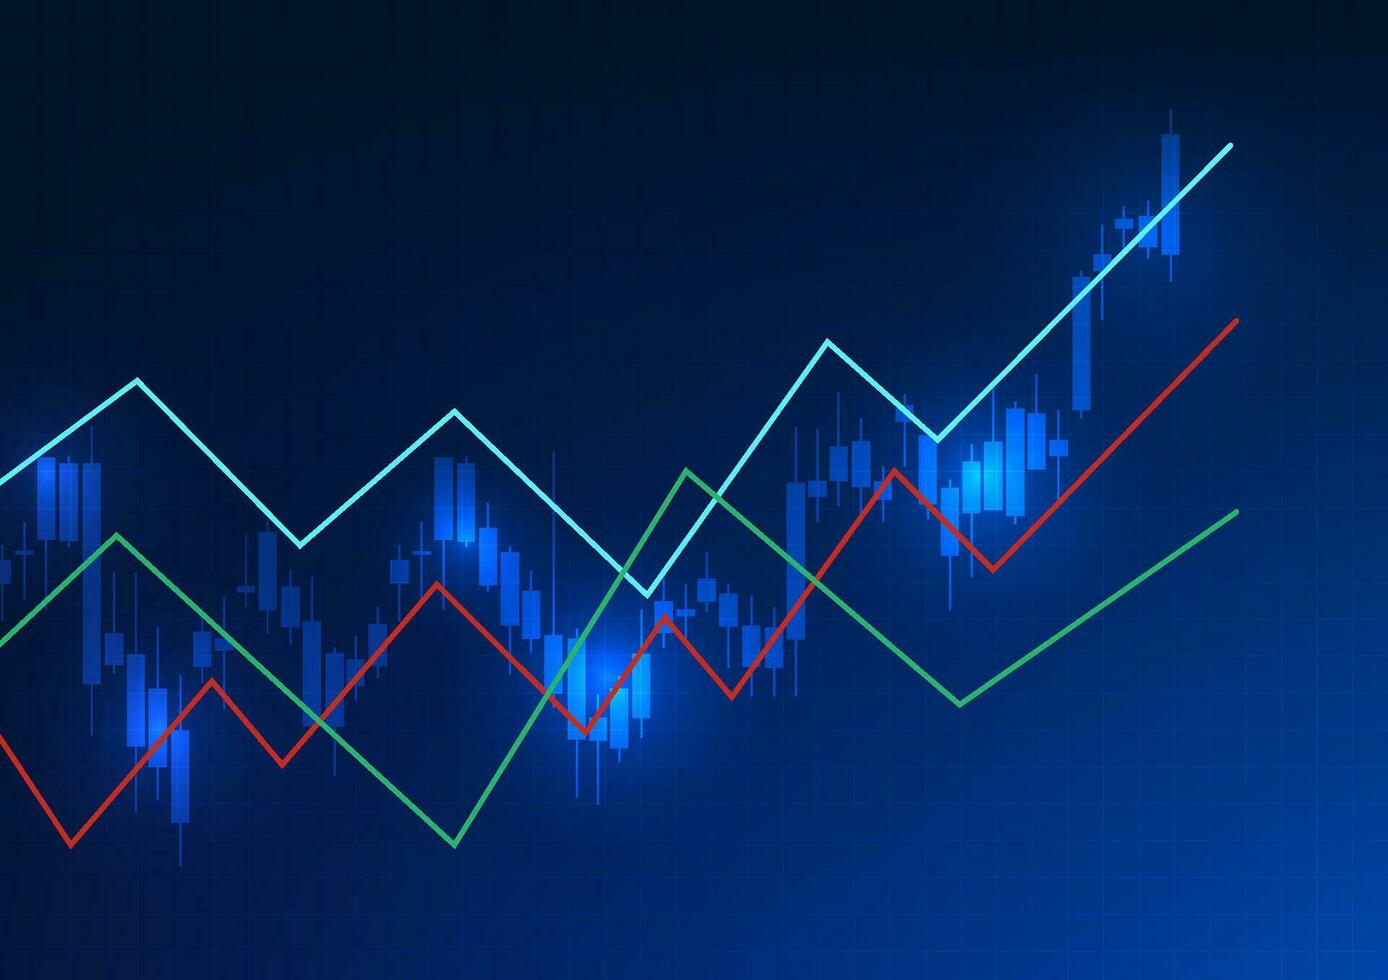 Technology background with price charts used to measure the growth, profit, and loss of the company It is a dark blue vector illustration of candlestick charts and line charts.